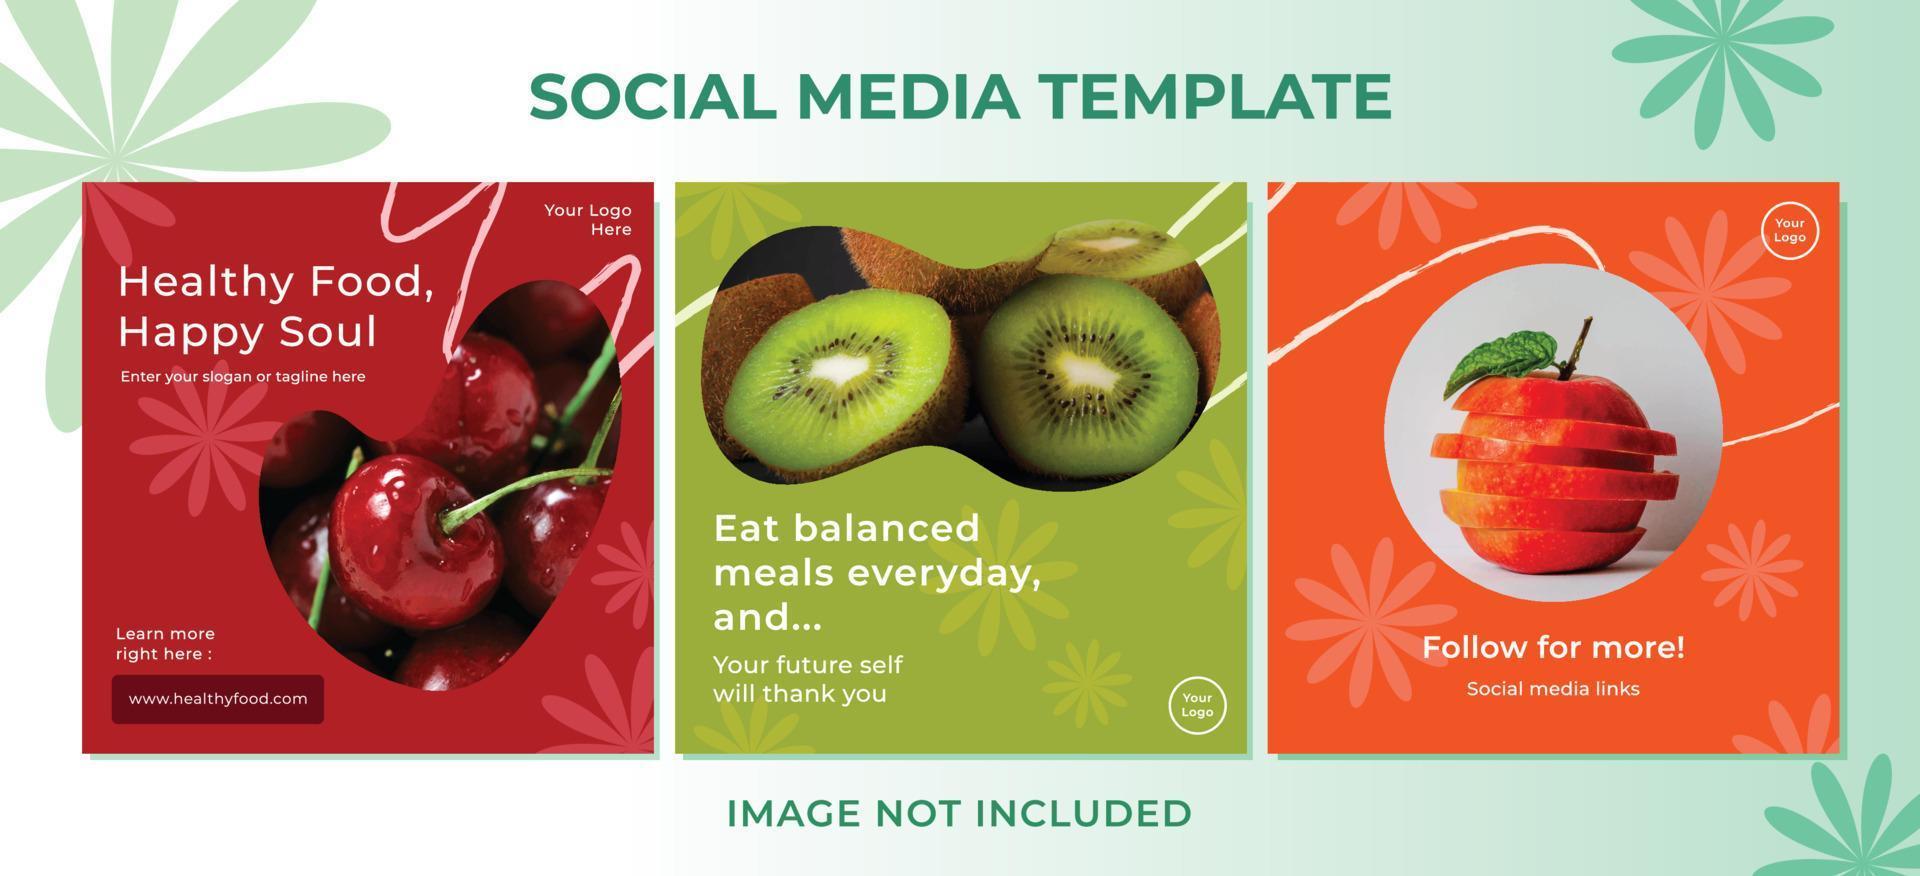 Healthy lifestyle with eating fruit social media post template with flowers and free hand doodles element decorations. Colorful template for brochure, poster, social media or website post, and others. vector